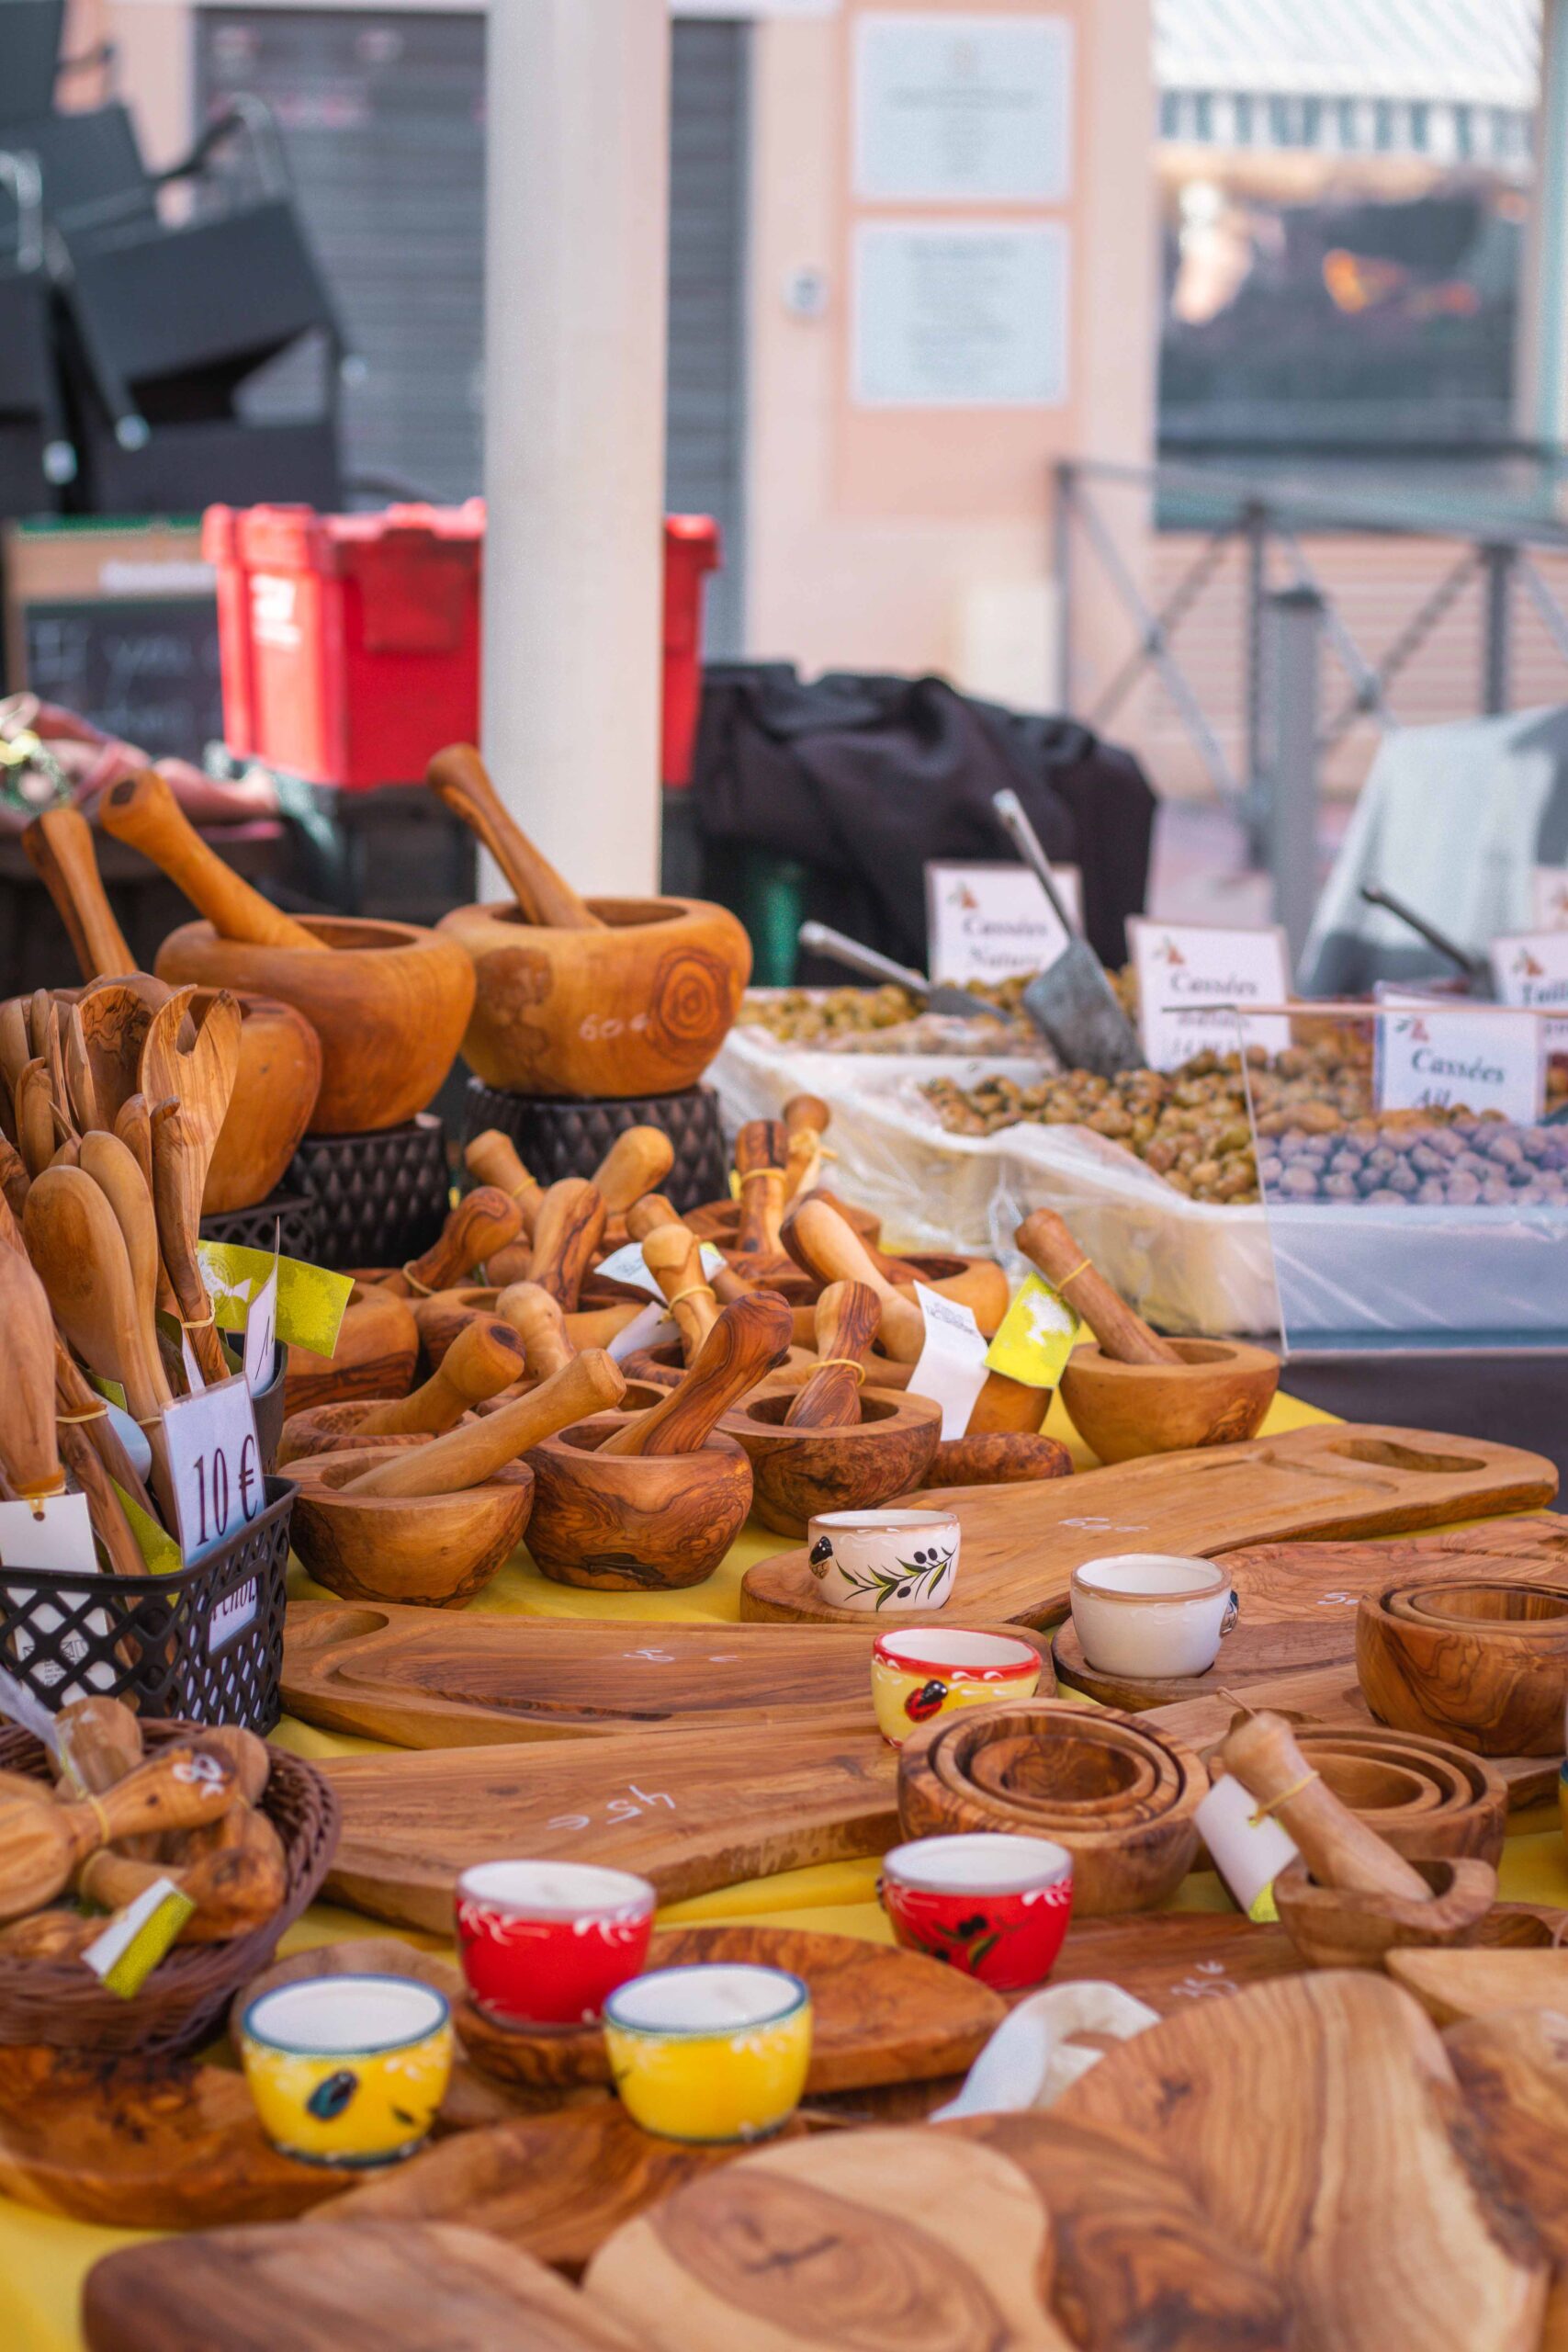 Details of a market stall selling wooden crafted cooking tools at the Marché Aux Fleurs Cours Saleya in Nice, France